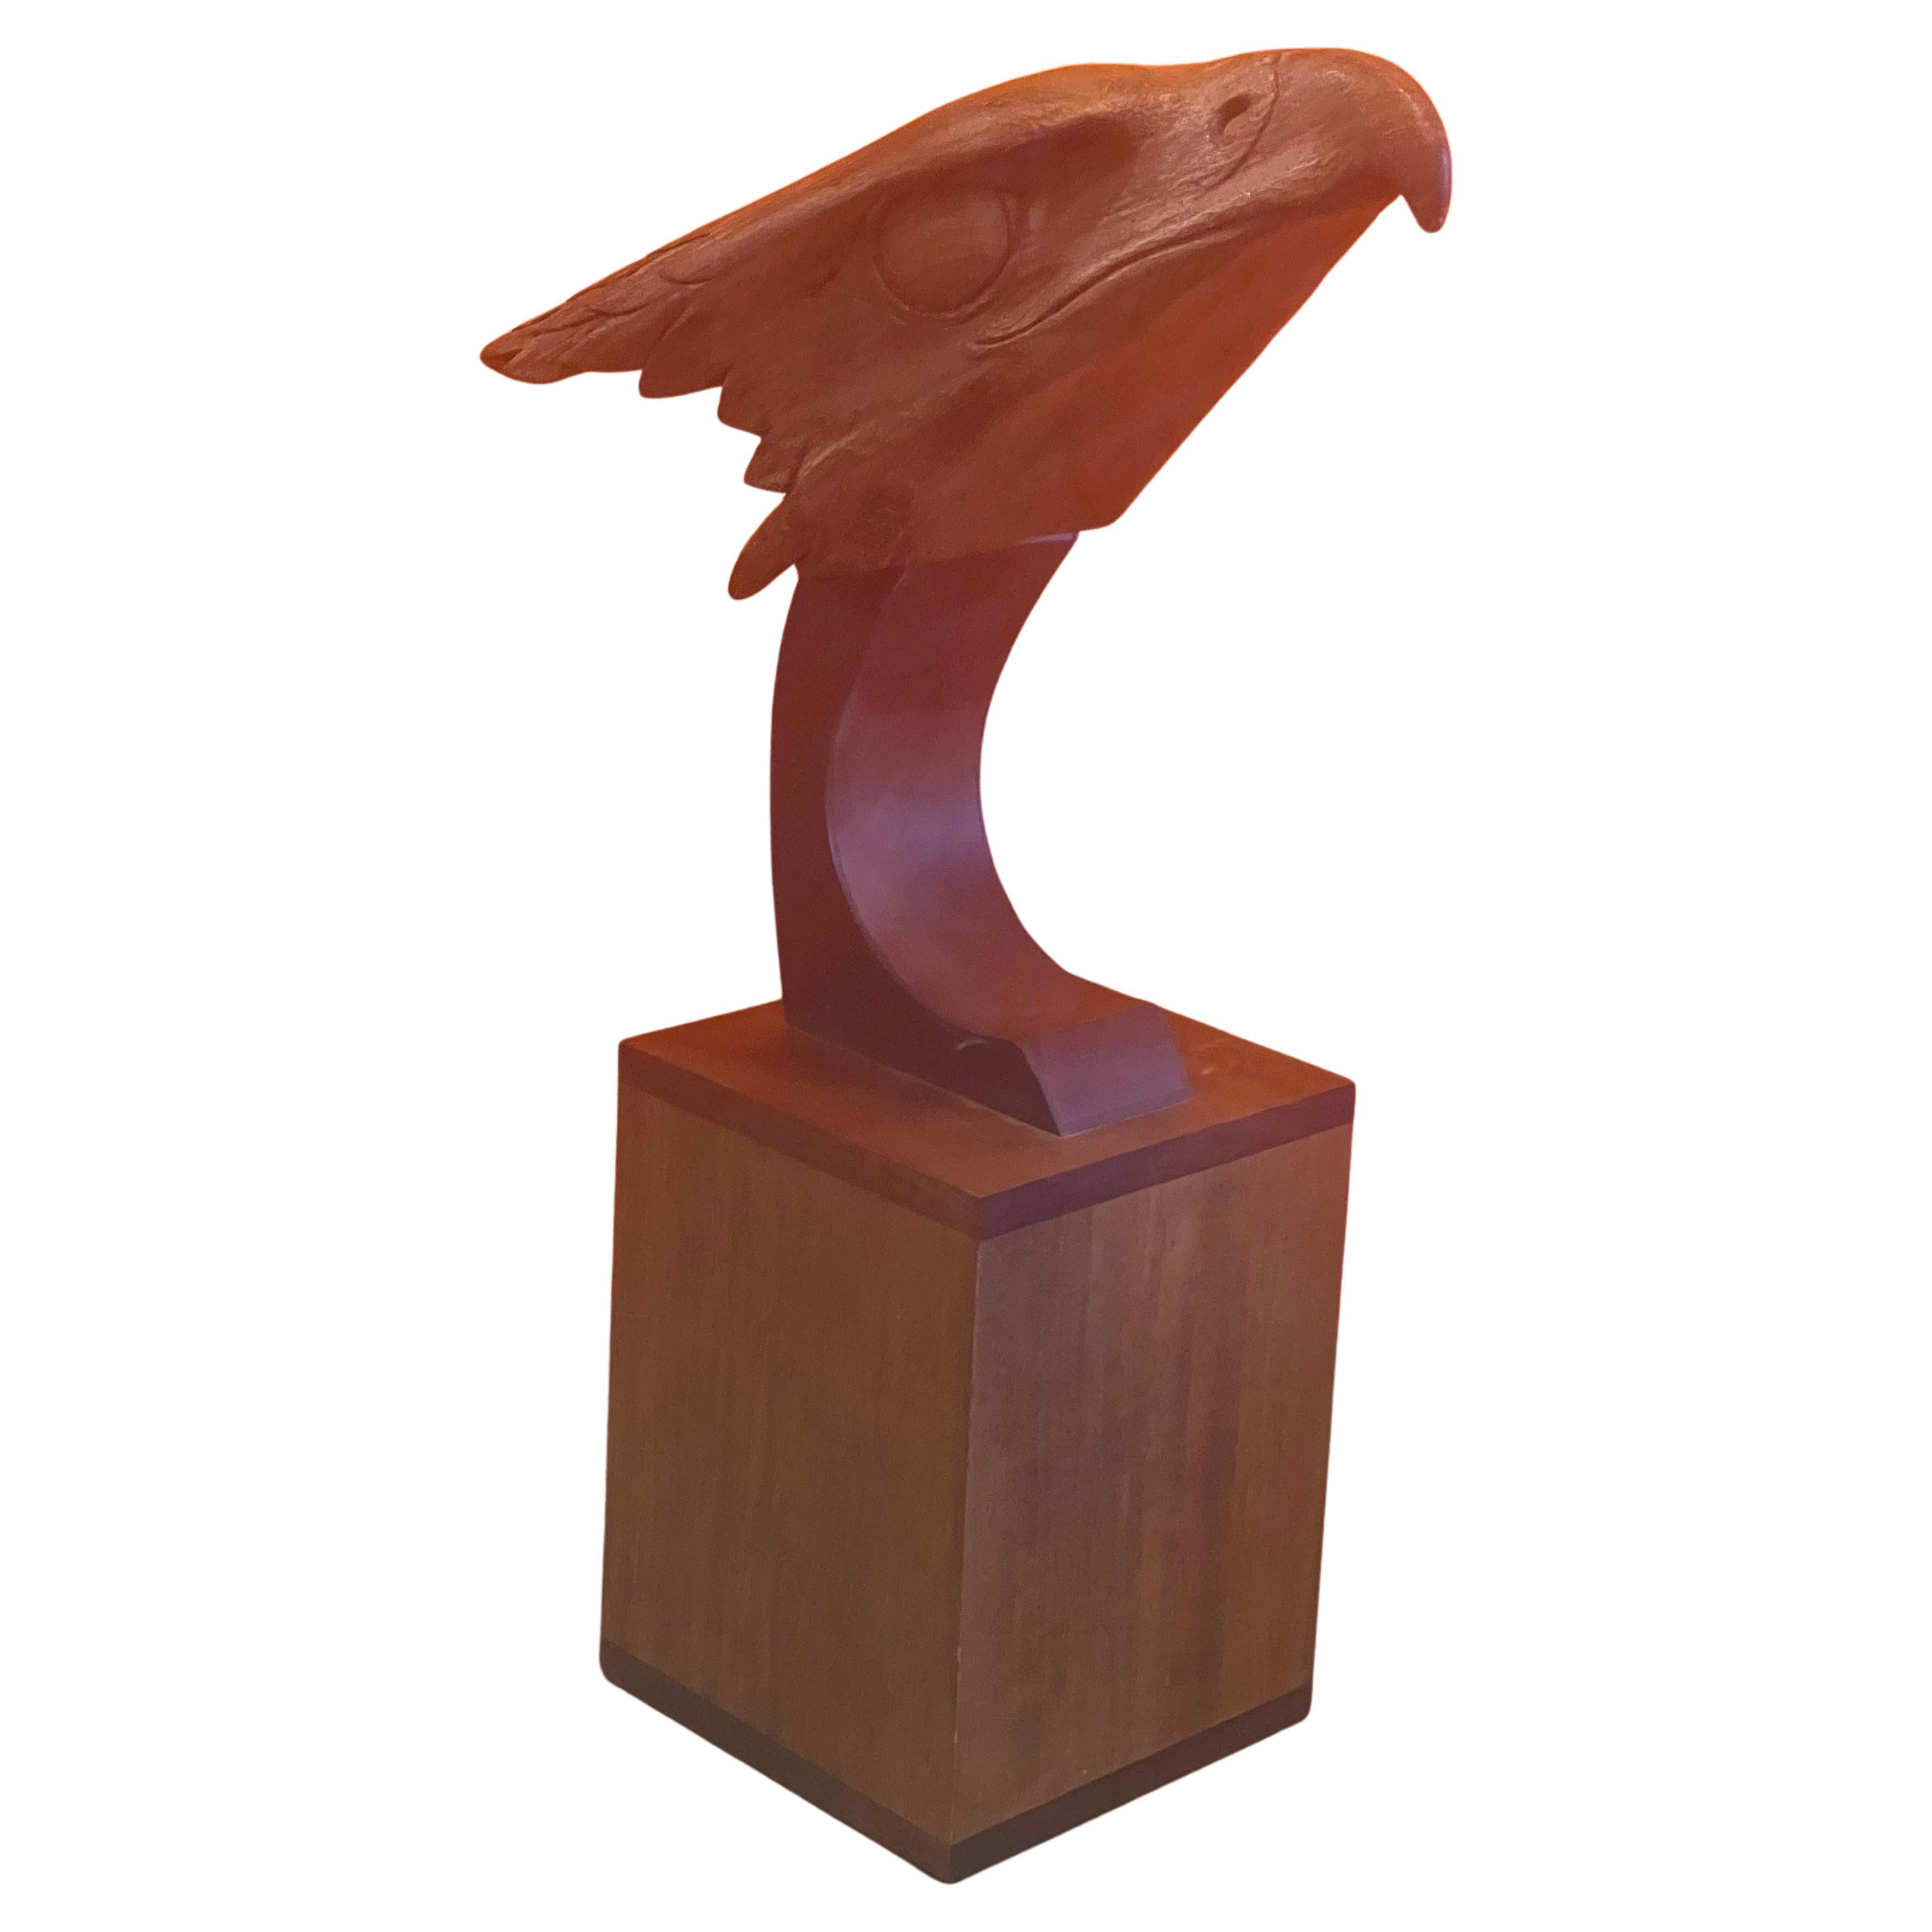 A truly striking hand carved teak bald eagle head sculpture on wood base, circa 1970s. The piece is in very good vintage condition and measures 15